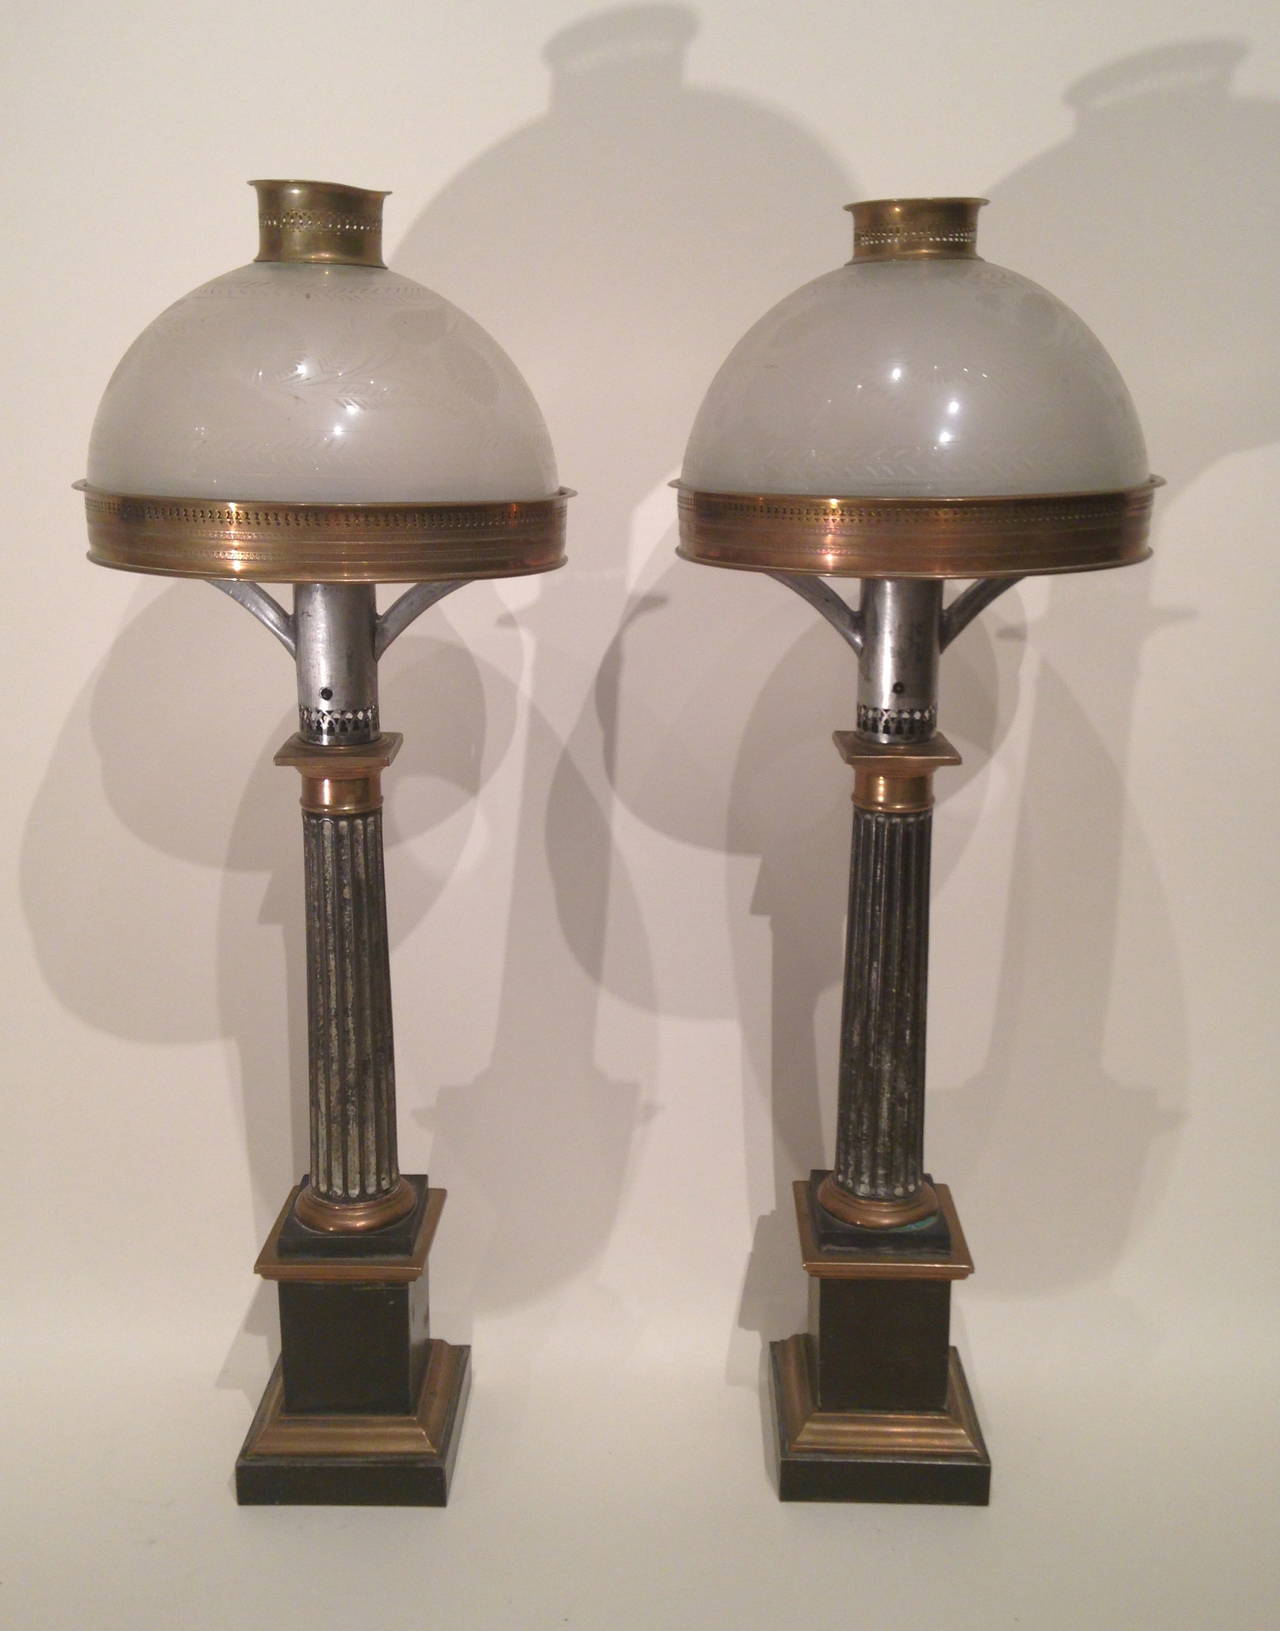 Pair of French fine Carcel lamps Paris, circa 1810.
Pair of lamps called 